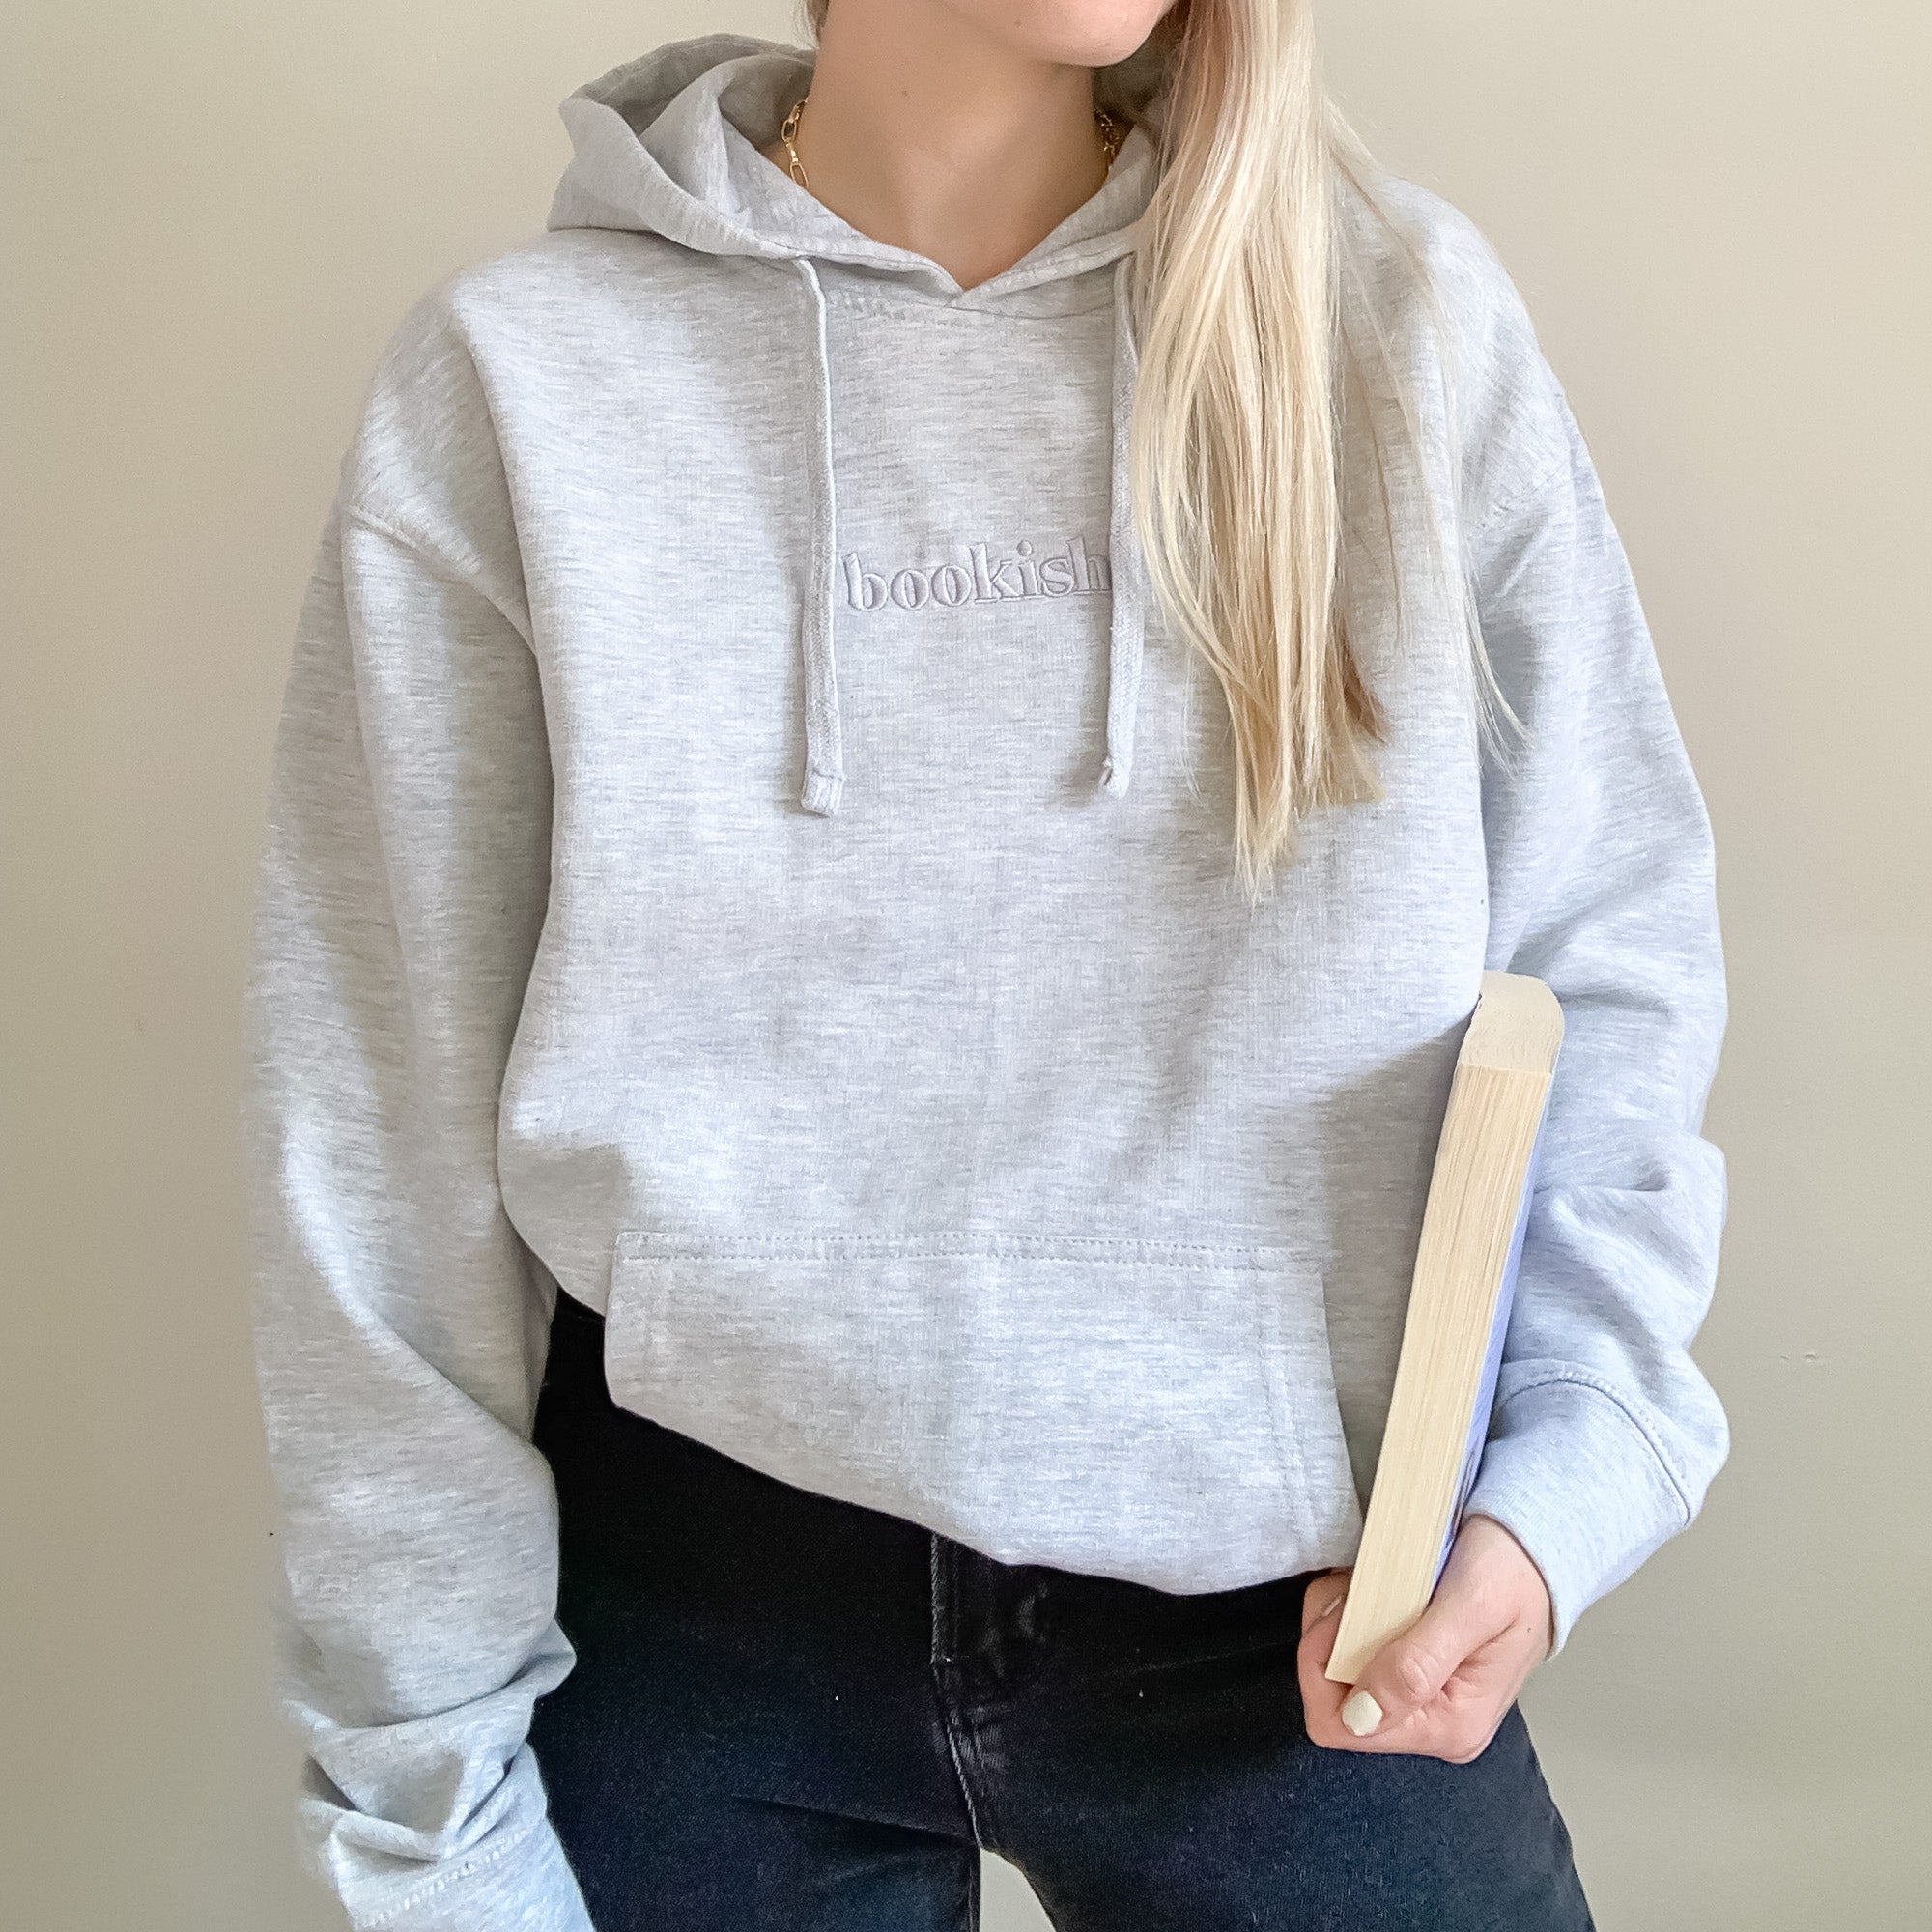 Paradis svar automat Bookish Embroidered Hoodie - Gray – The Bookish Goods